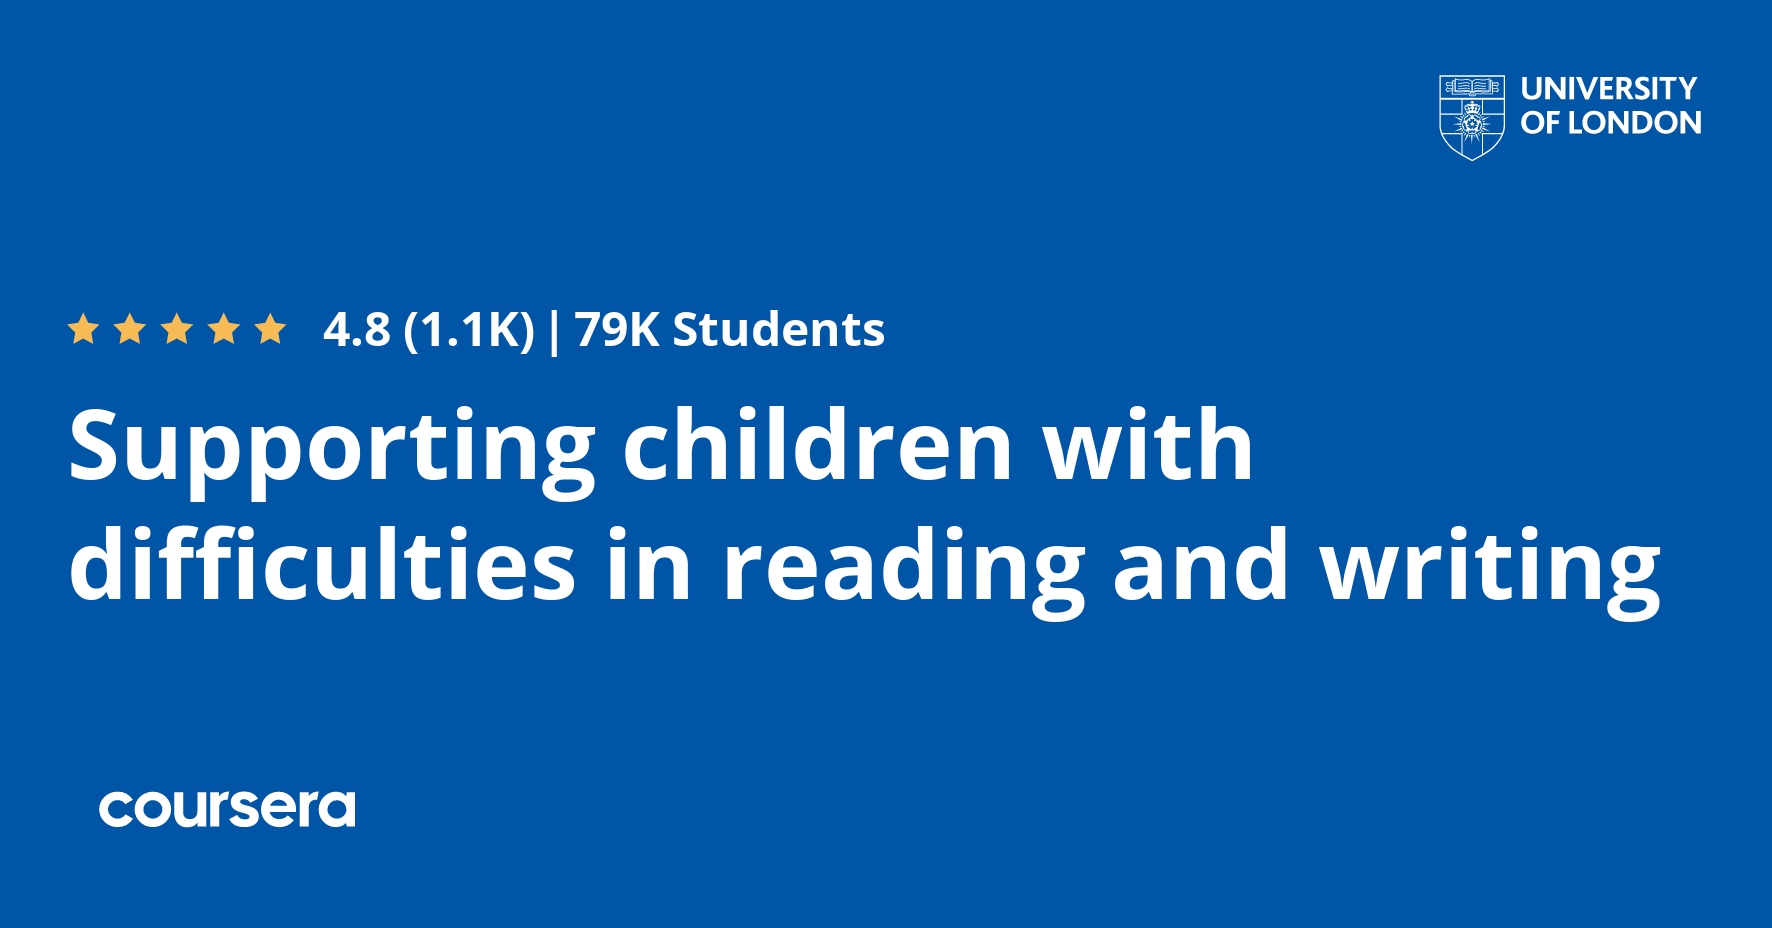 Supporting children with difficulties in reading and writing